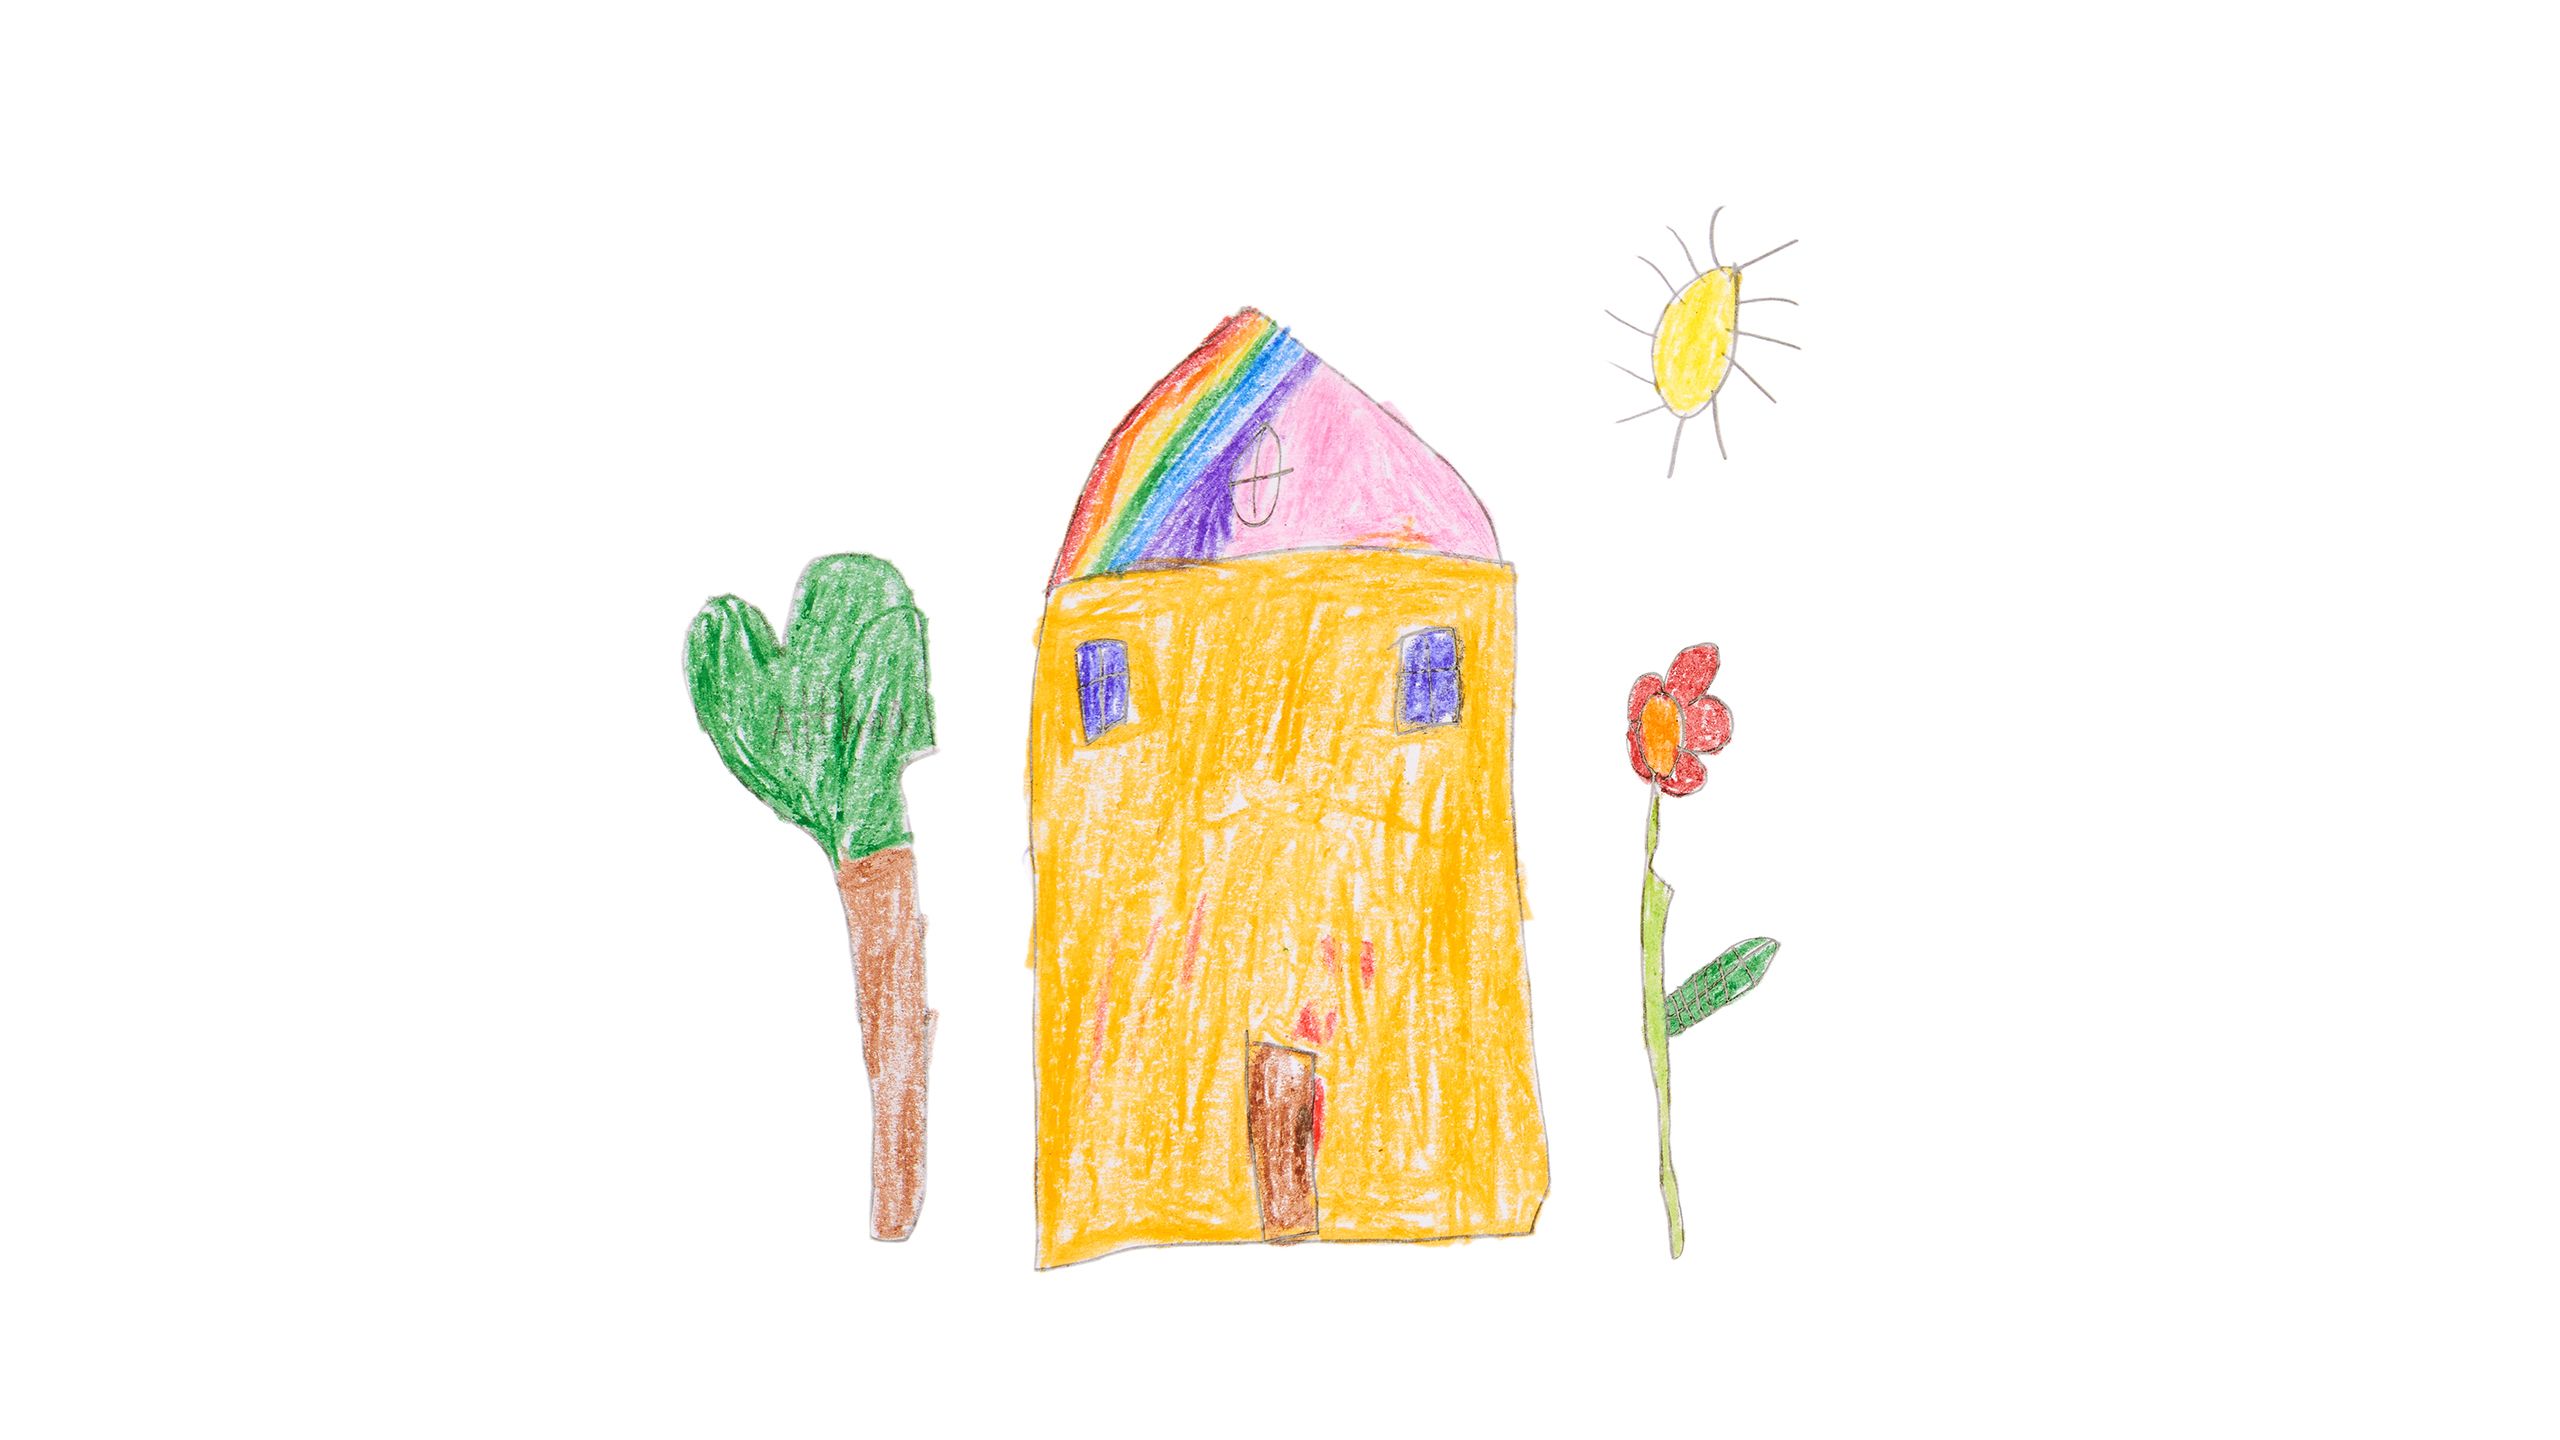 Crayon drawing of a bright yellow house with a pink and rainbow roof, flanked by a tree and tall red flower.